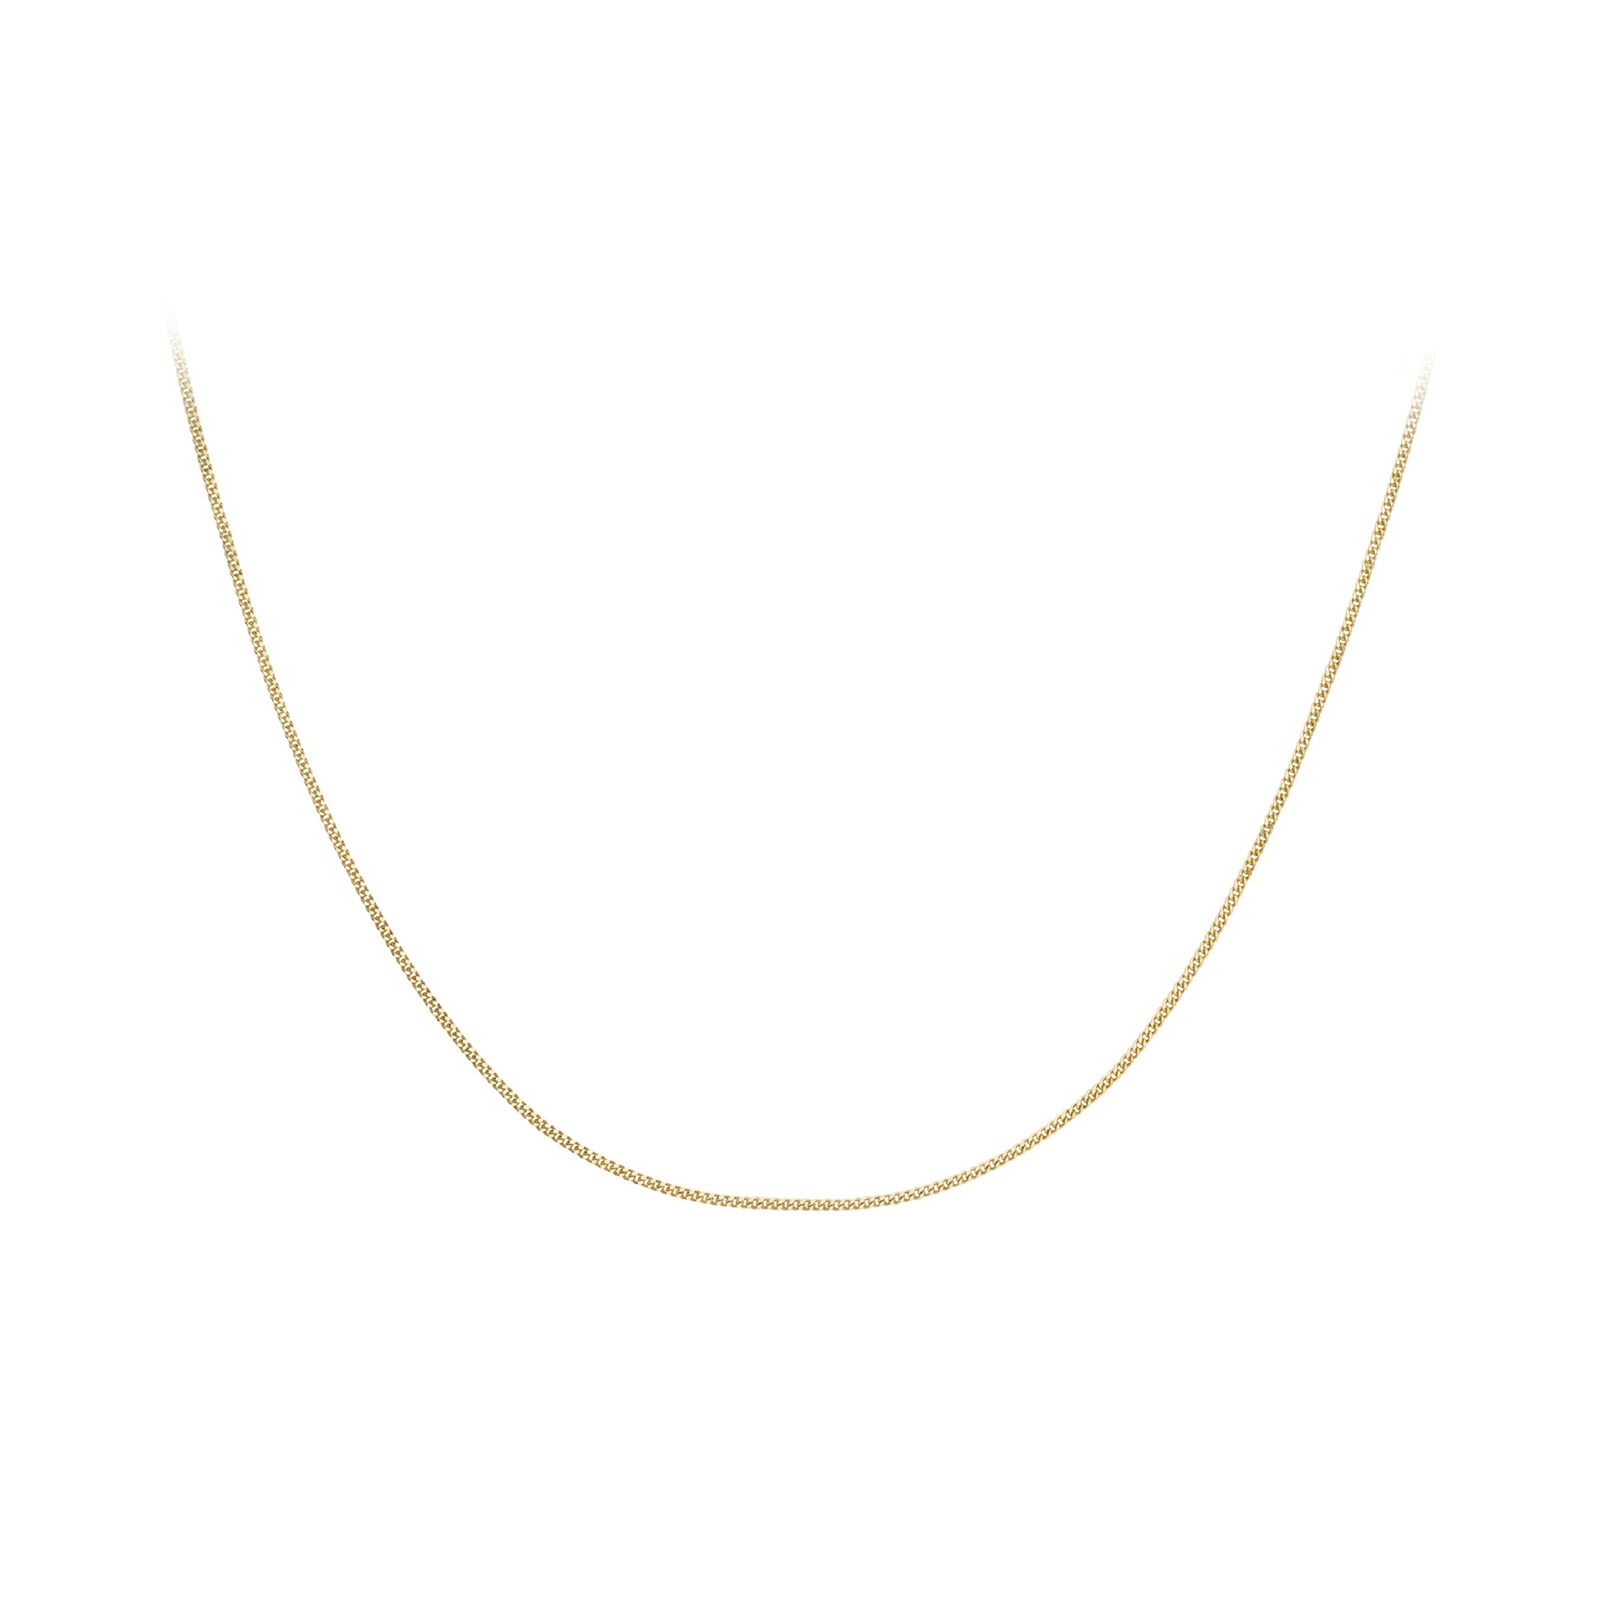 Estendly 18k Real Gold Plated 20 Inches Figaro Chain Necklace 4MM Stainless  Steel Figaro Link Chain for Men Women : Amazon.in: Fashion